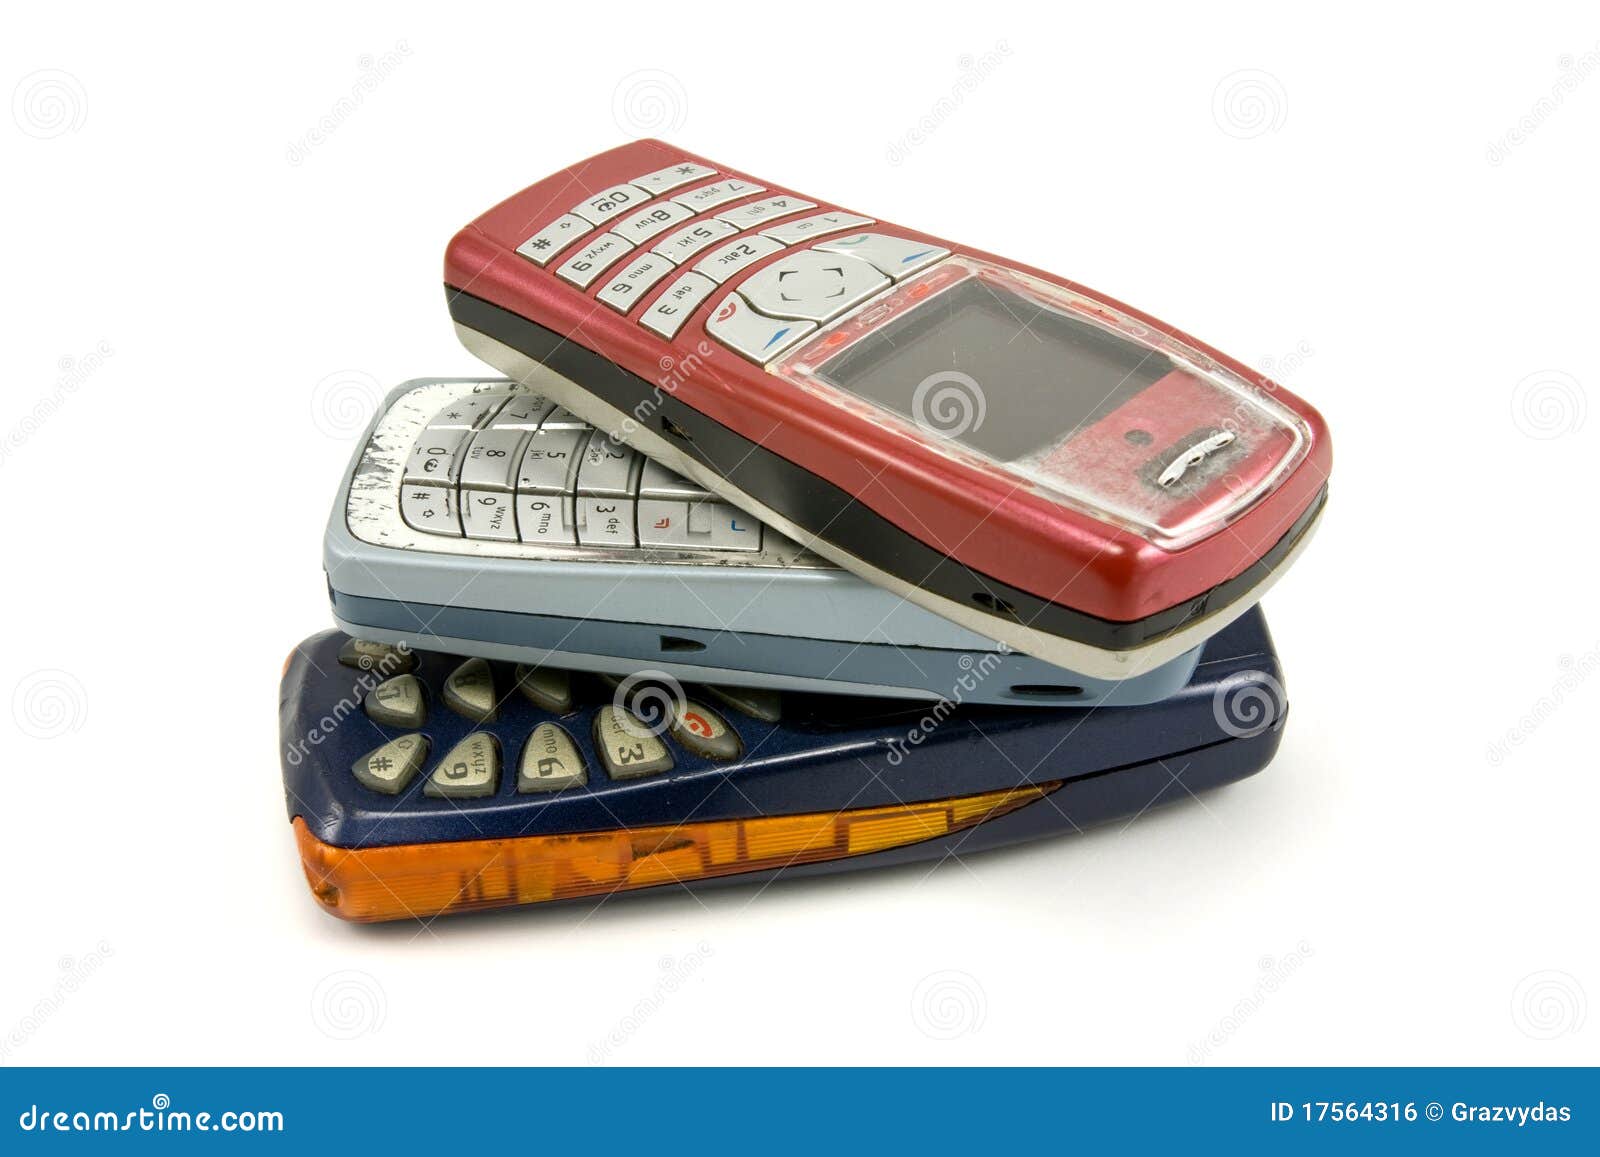 Royalty Free Stock Image: Used old Cell phones